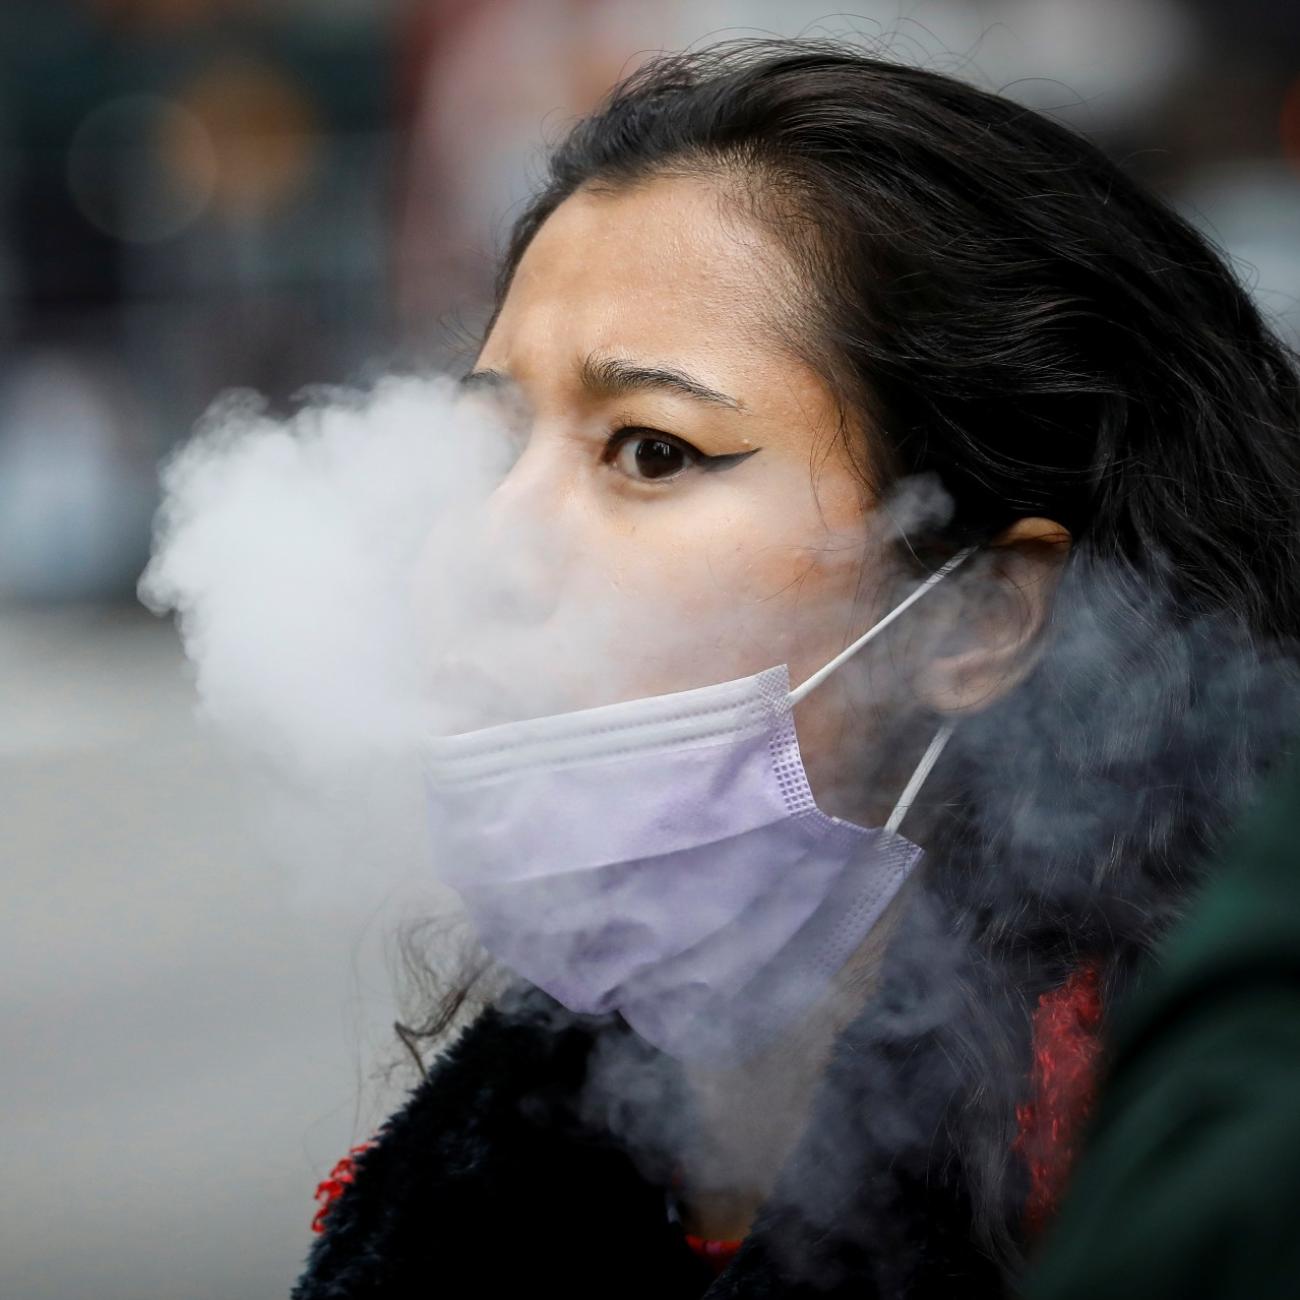 A woman exhales after vaping in Times Square, during the COVID-19 outbreak, in New York City, on March 31, 2020.